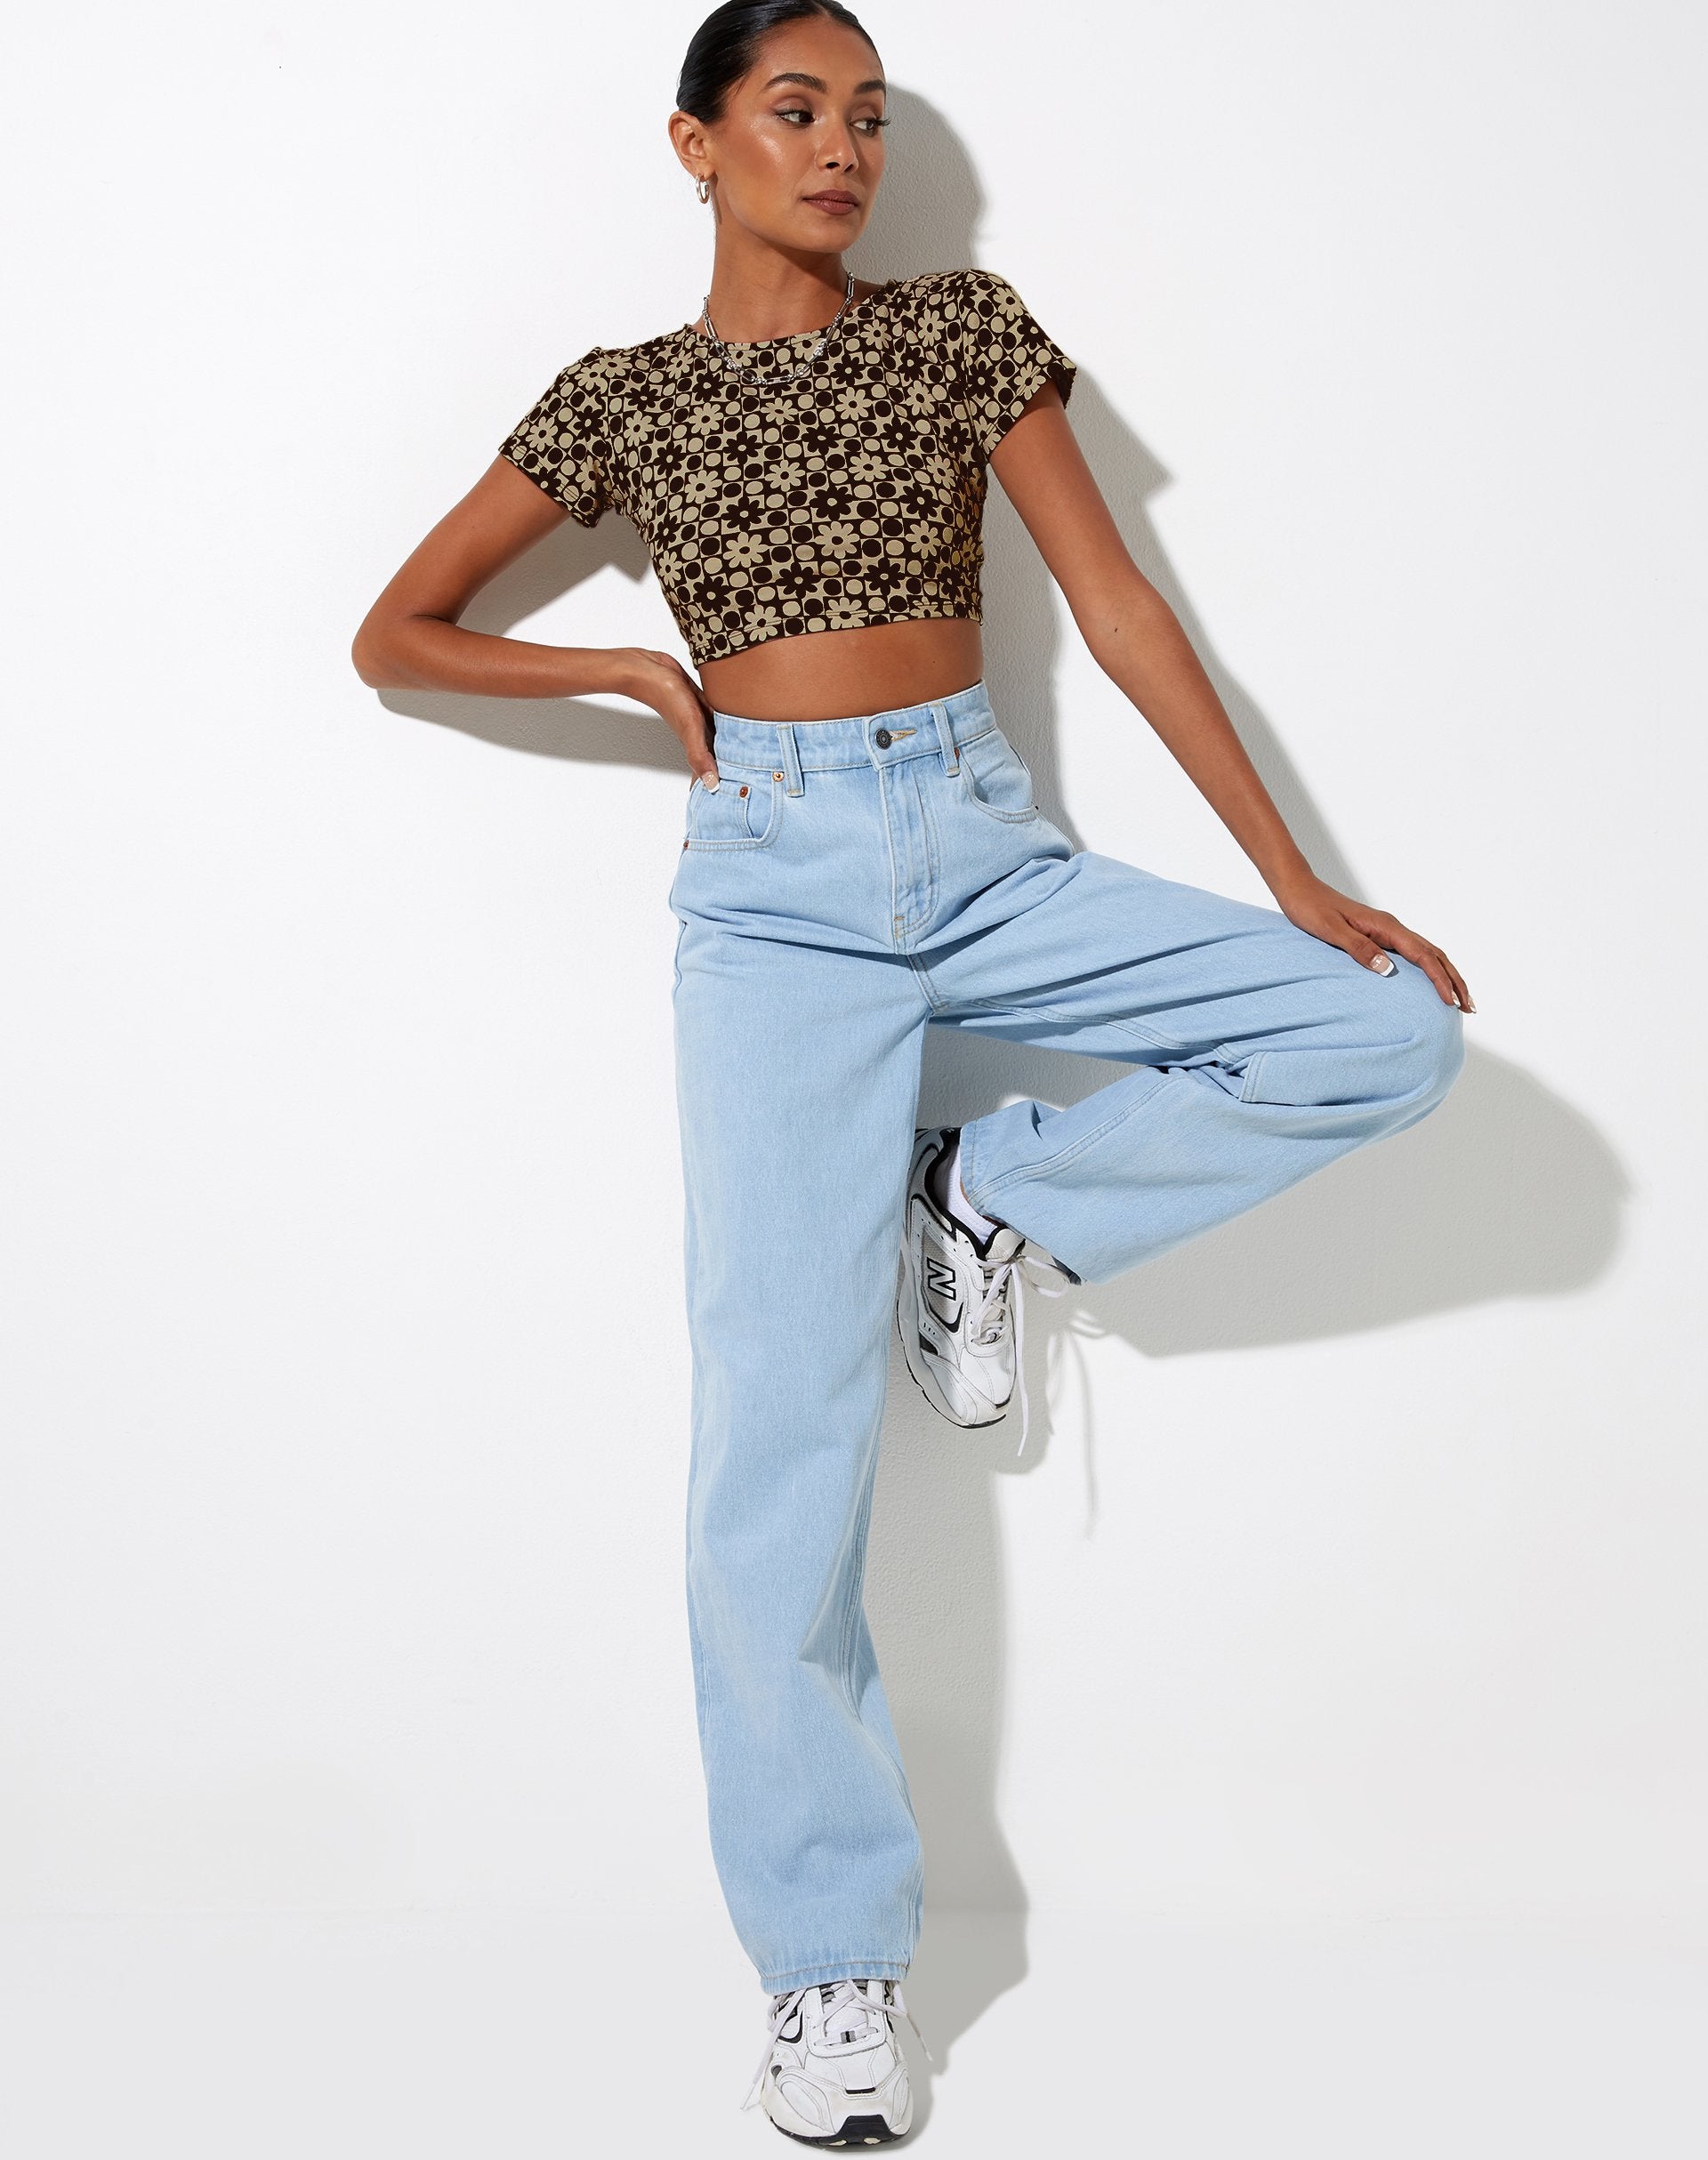 Image of Tindy Crop Top in Patchwork Daisy Brown